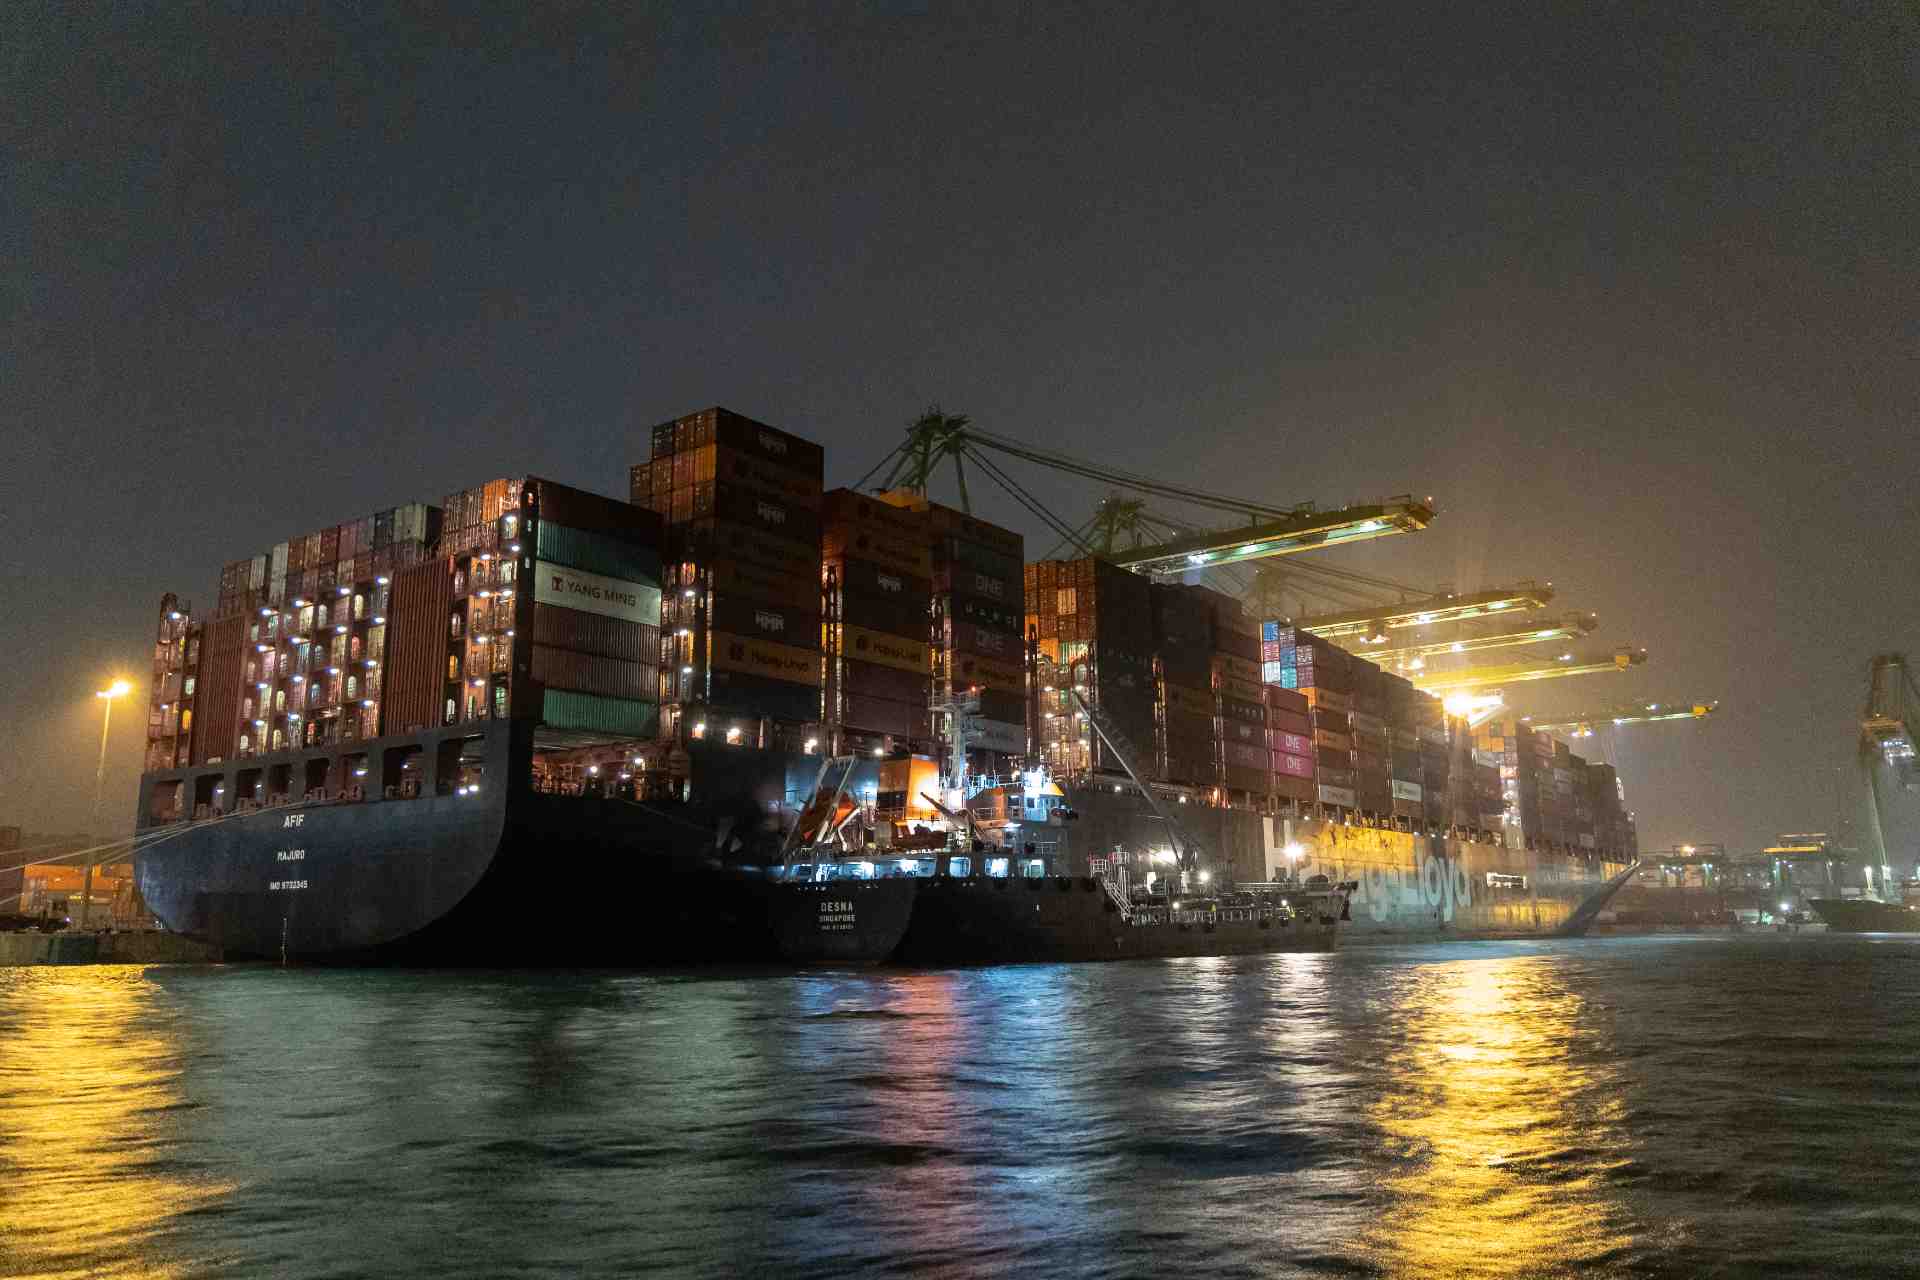 Bunkering barge operating in Singapore alongside Hapag-Lloyd containership